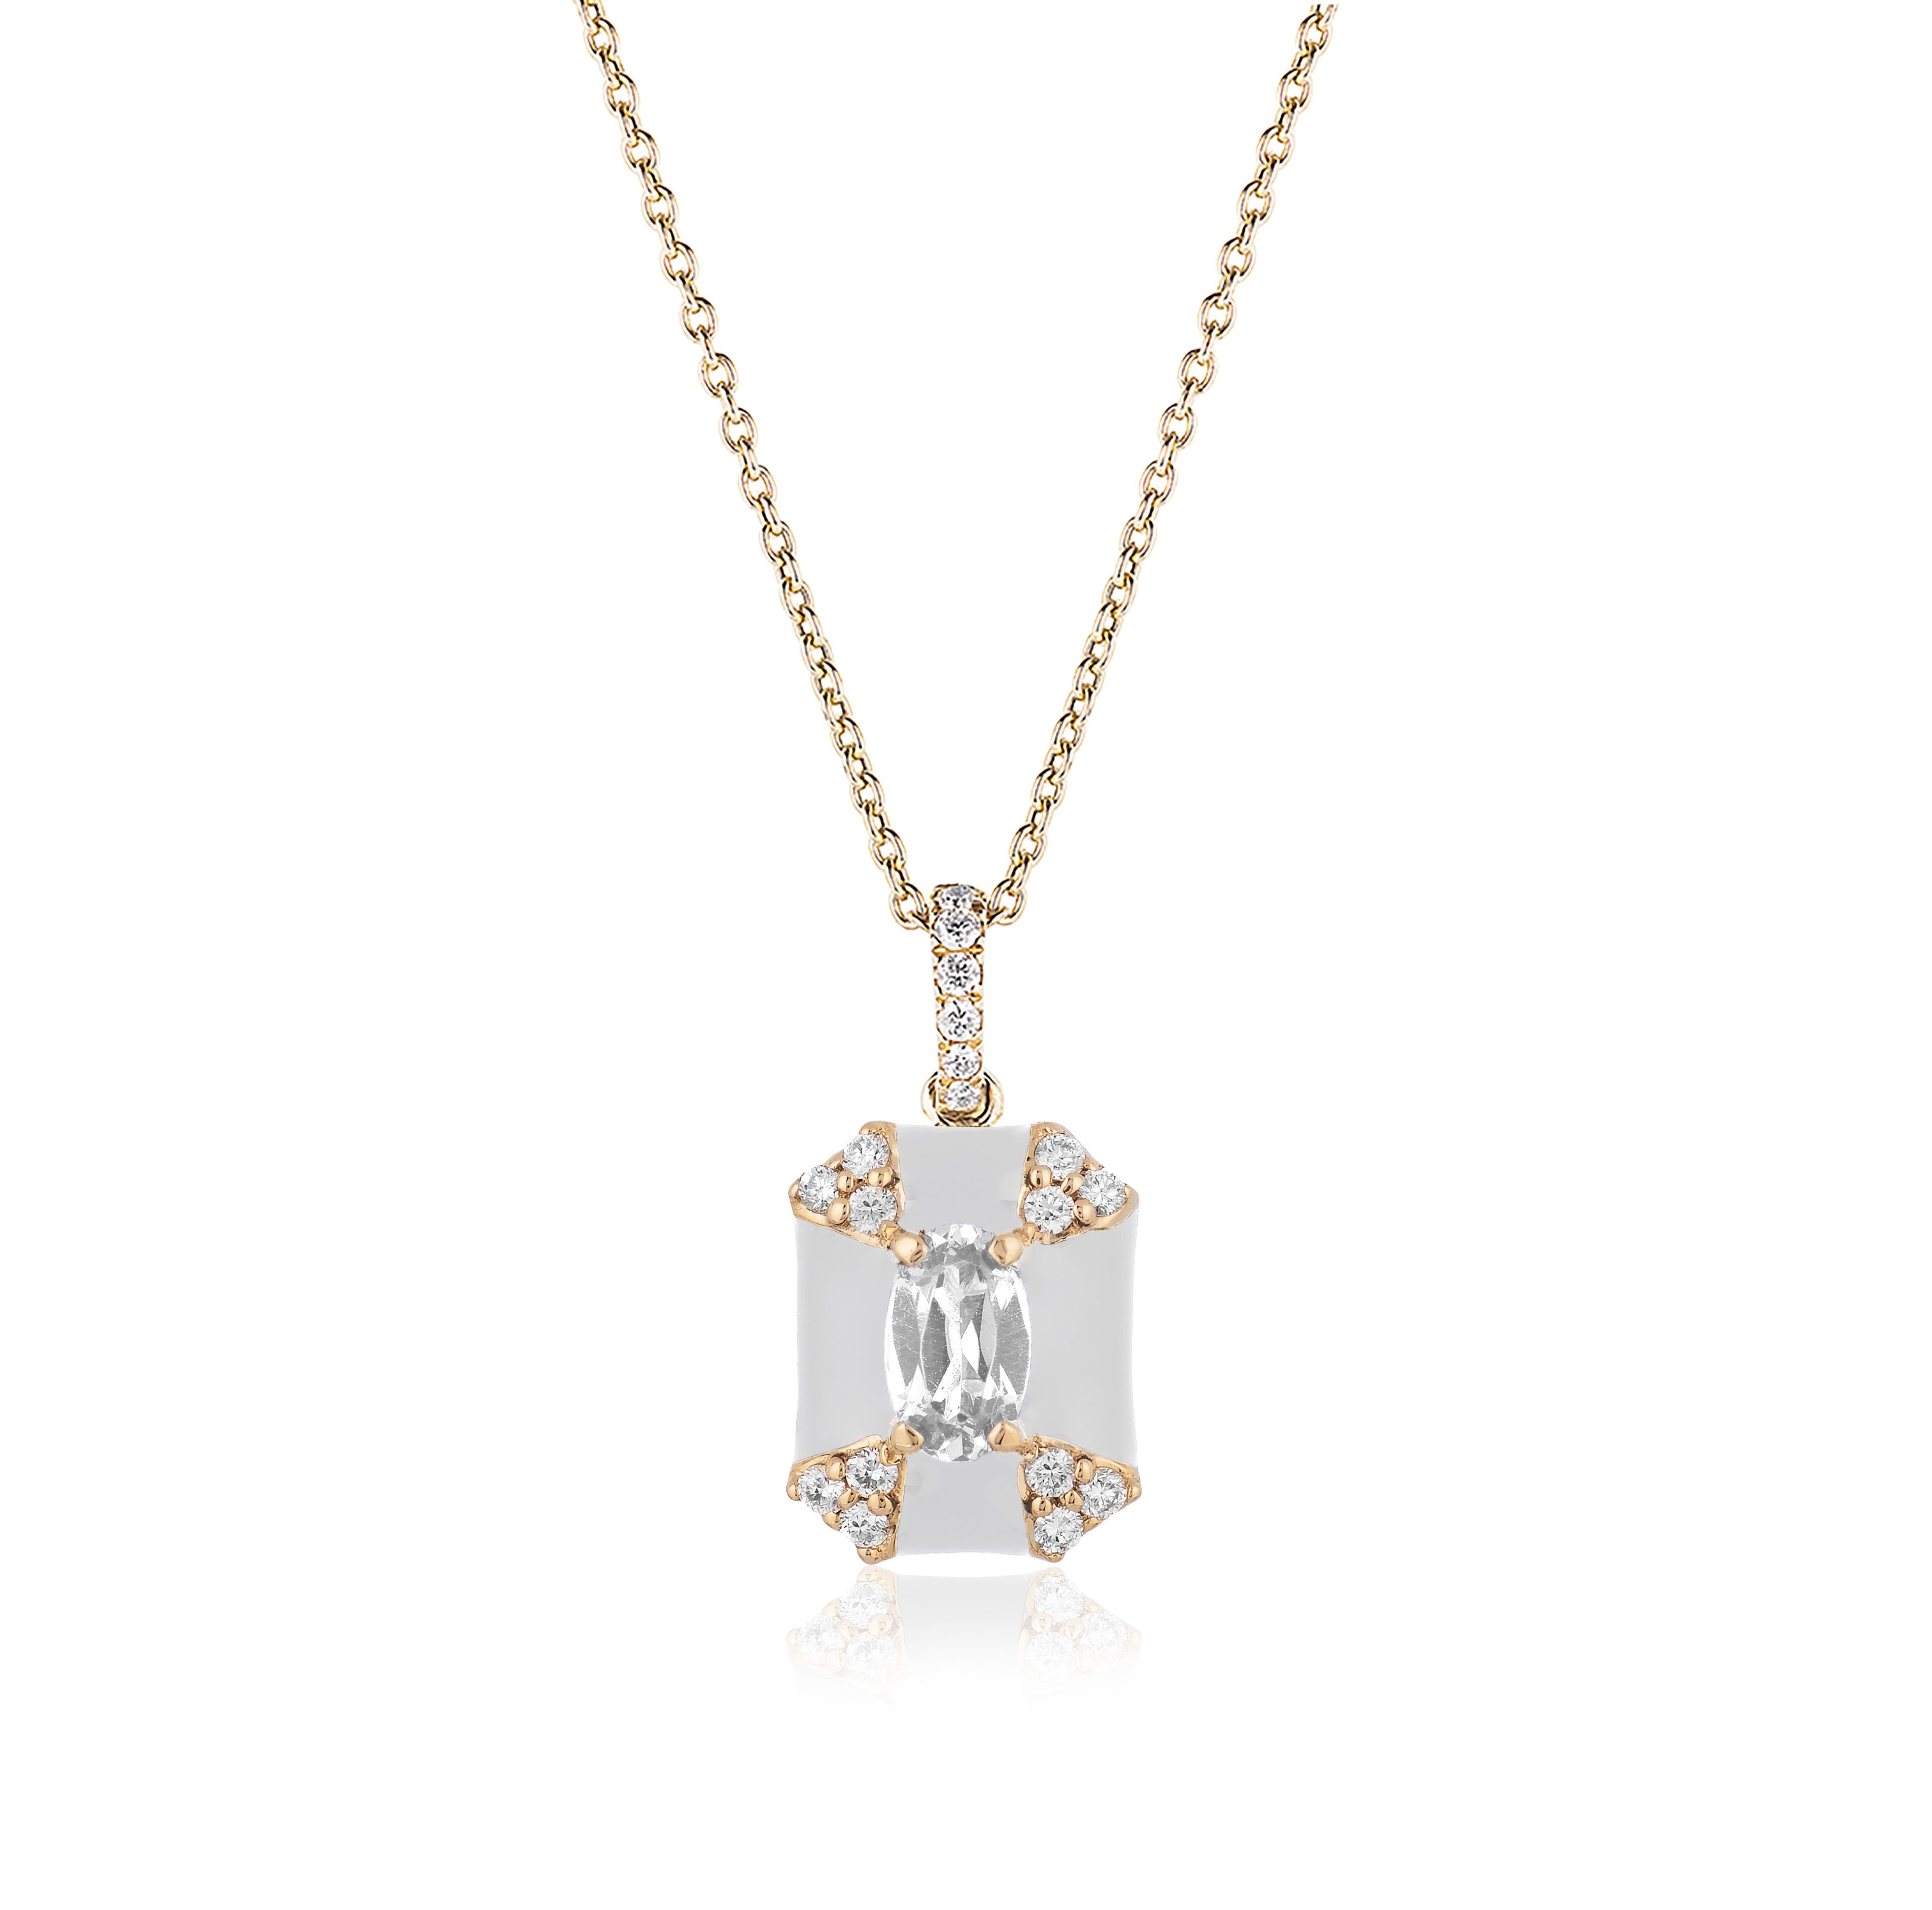 'Queen' Octagon White Enamel Pendant with Diamonds in 18K Yellow Gold.

Stone Size: 4 mm